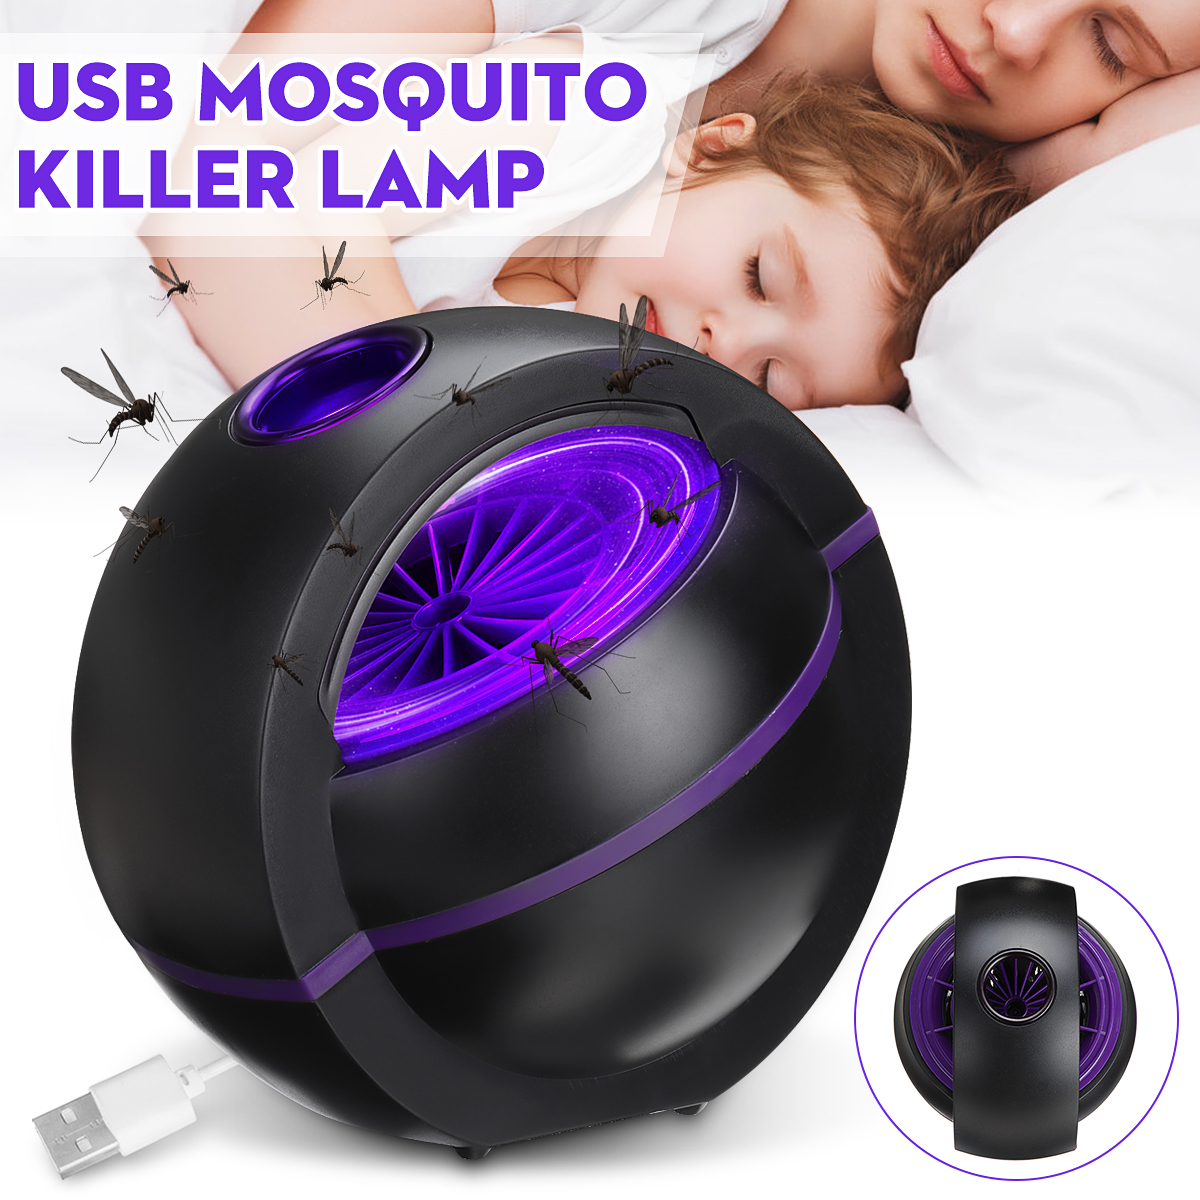 LED-Mosquito-Insect-Killer-Lamp-USB-Quiet-Fly-Bug-Zapper-Pest-Control-Light-No-Radiation-1670303-1